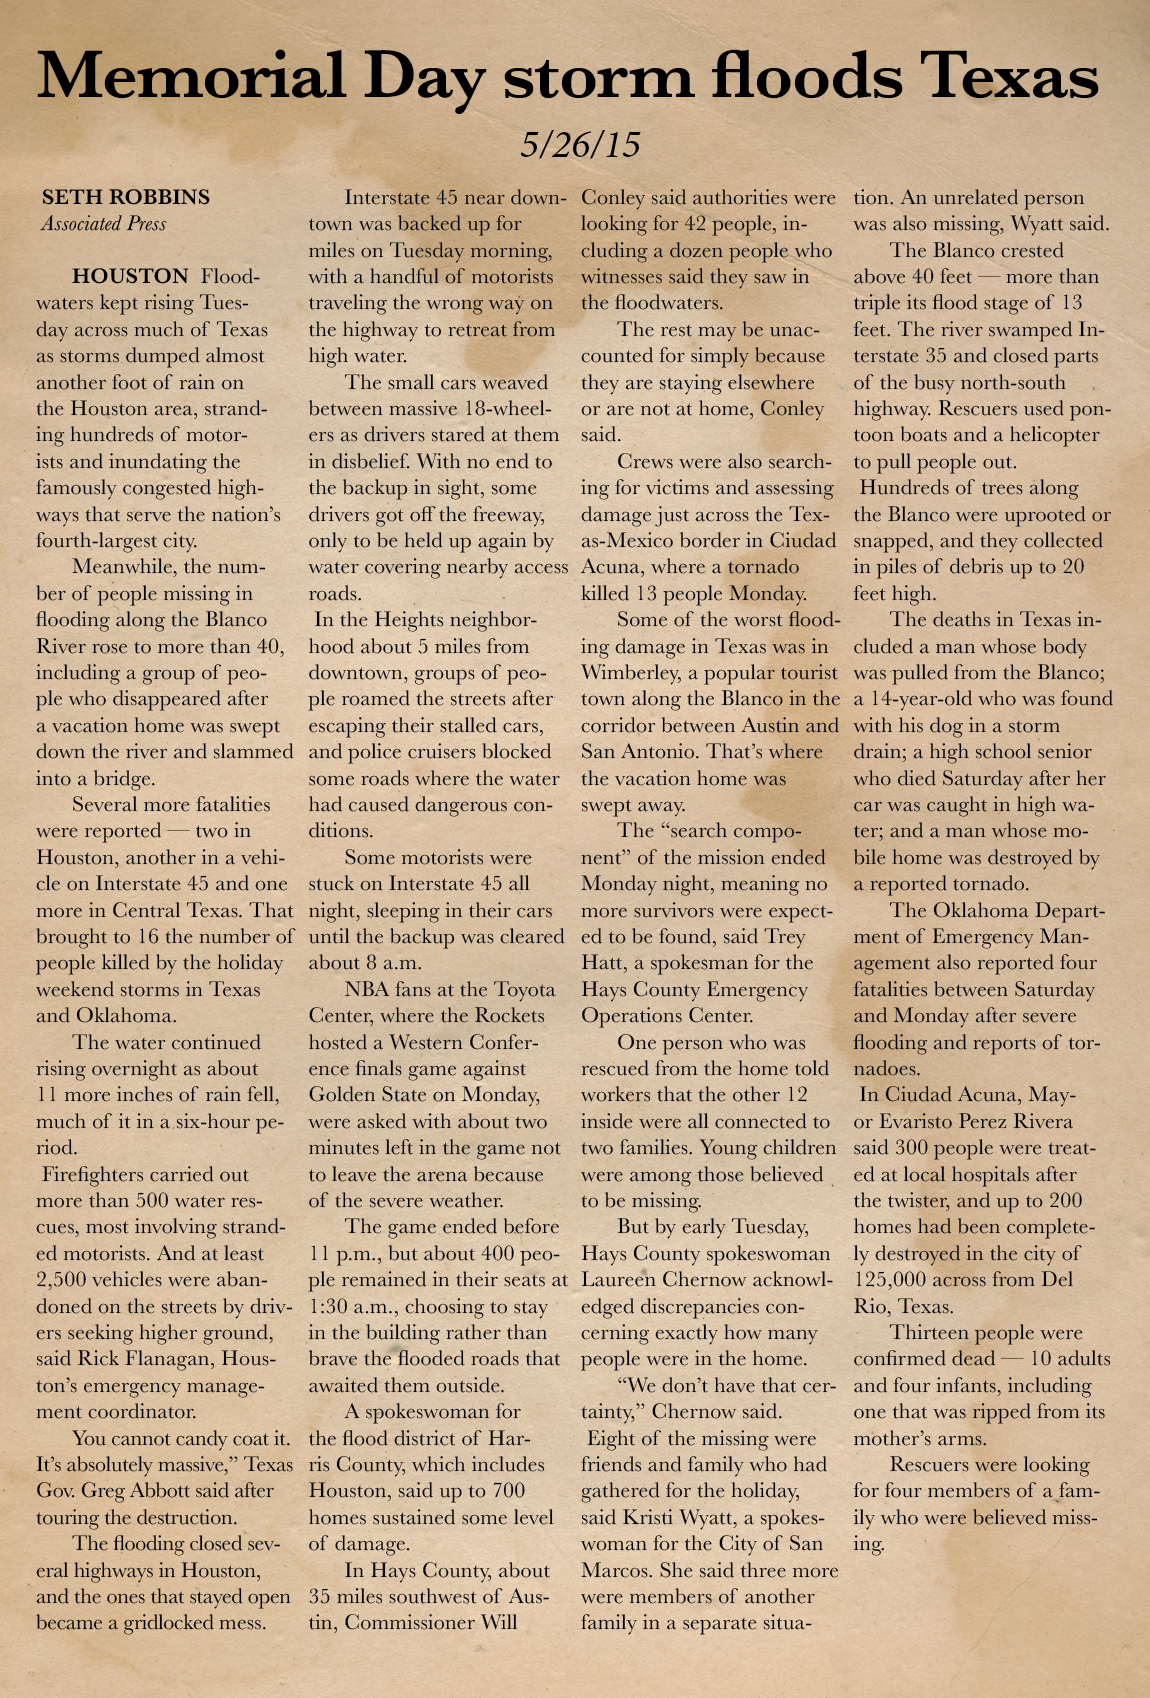 memorial_day_flood_article